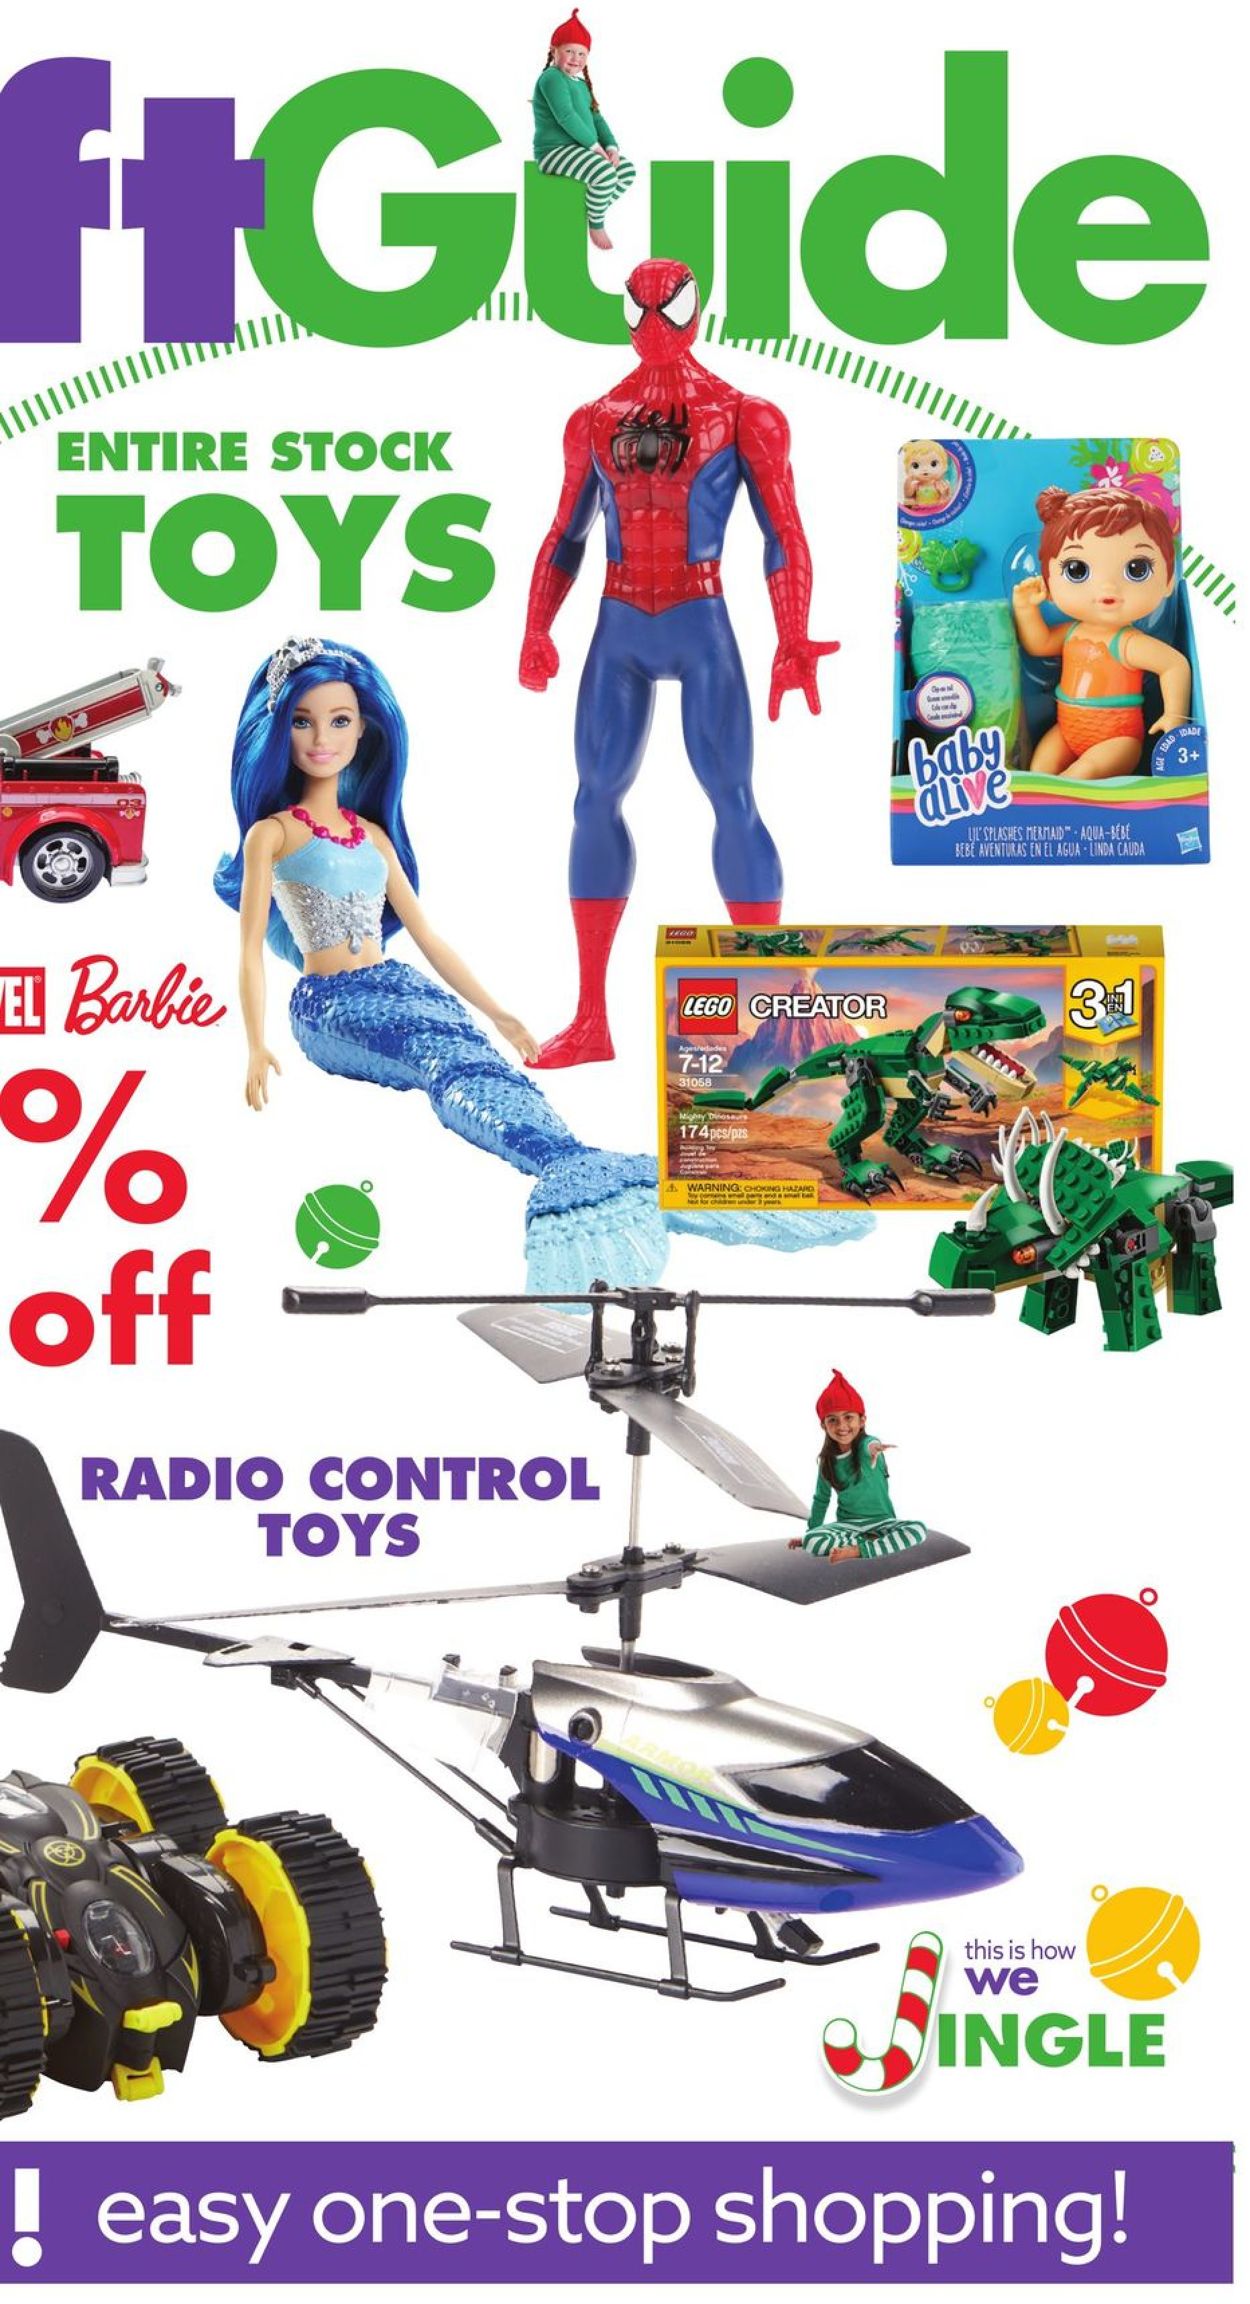 Catalogue Big Lots Black Friday Sale 2020 from 11/21/2020